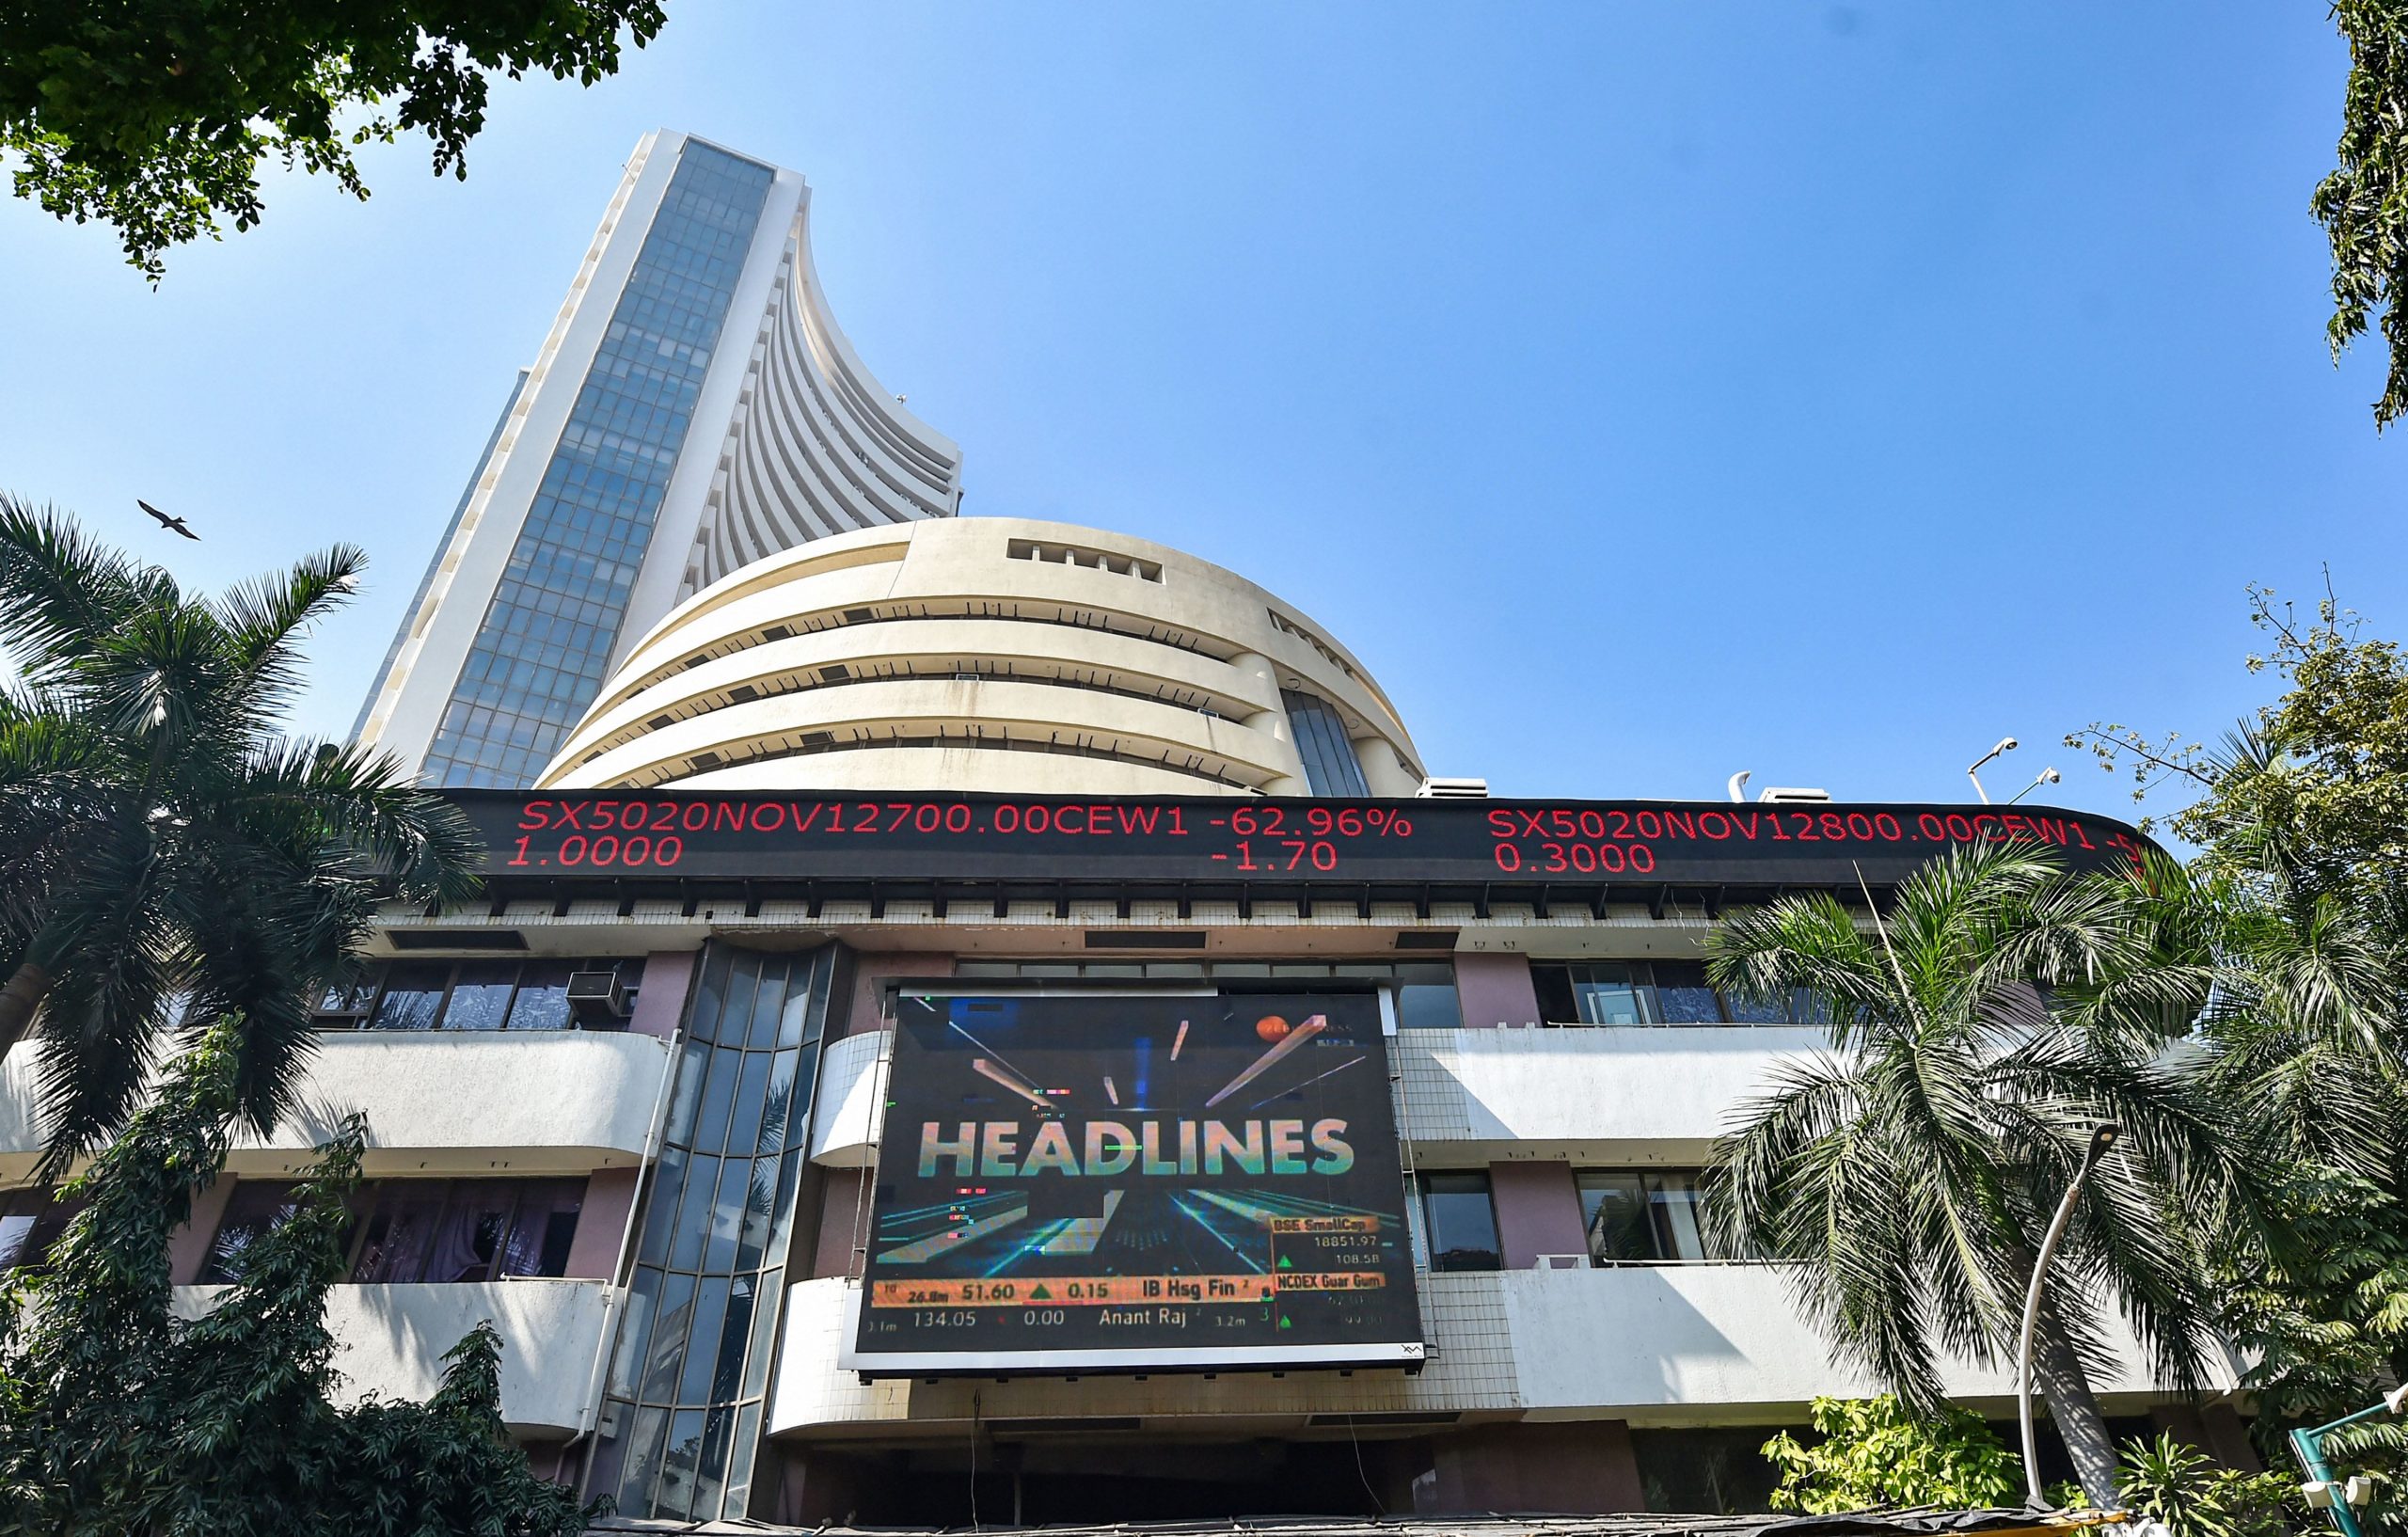 Trending Stocks: Nykaa, Tata Power, BSE, Power Grid and others in news today